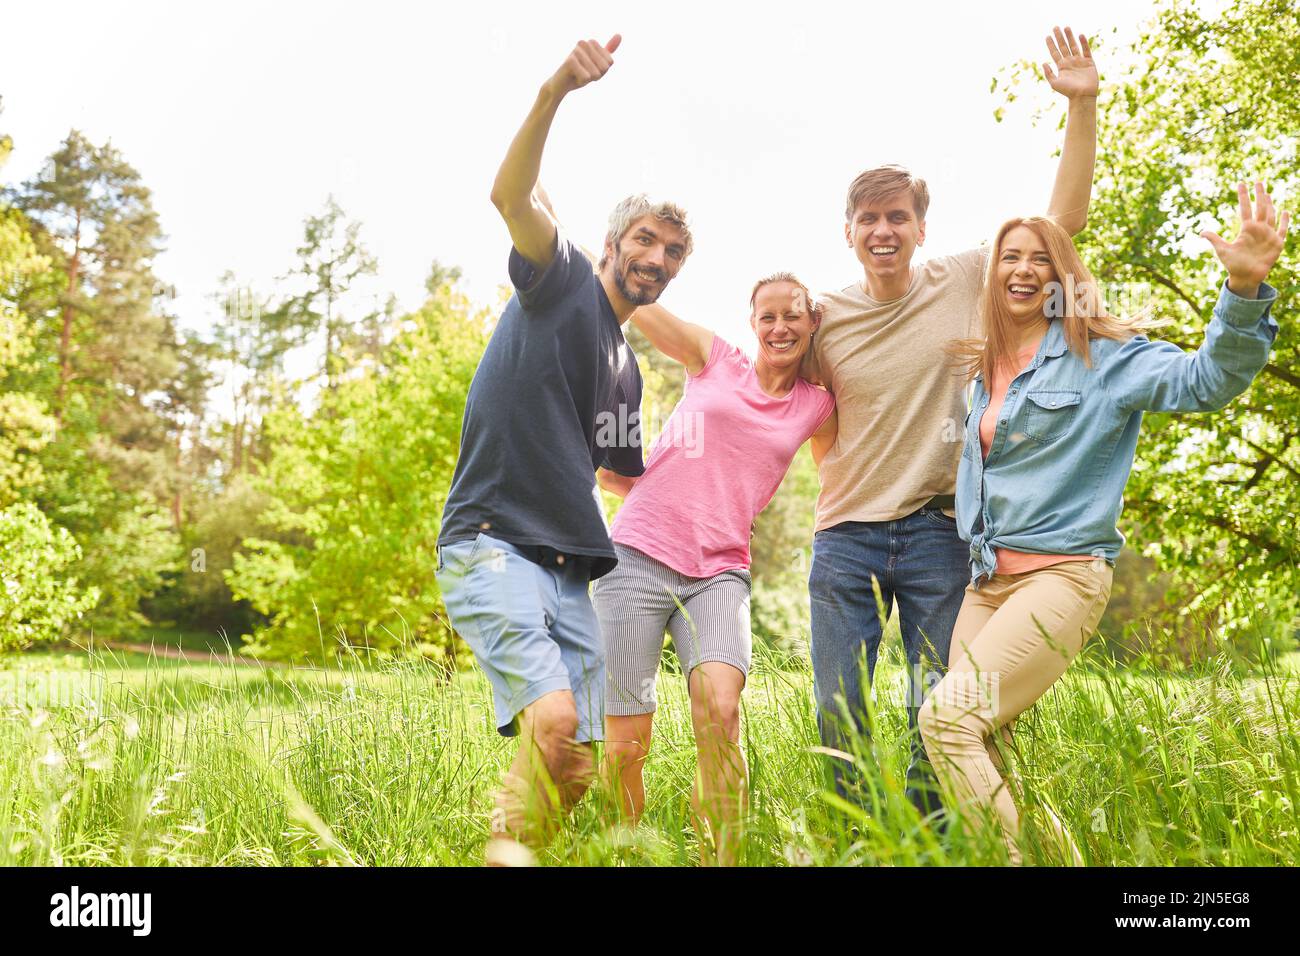 Group of friends as a happy community in nature for enthusiasm and joie de vivre Stock Photo